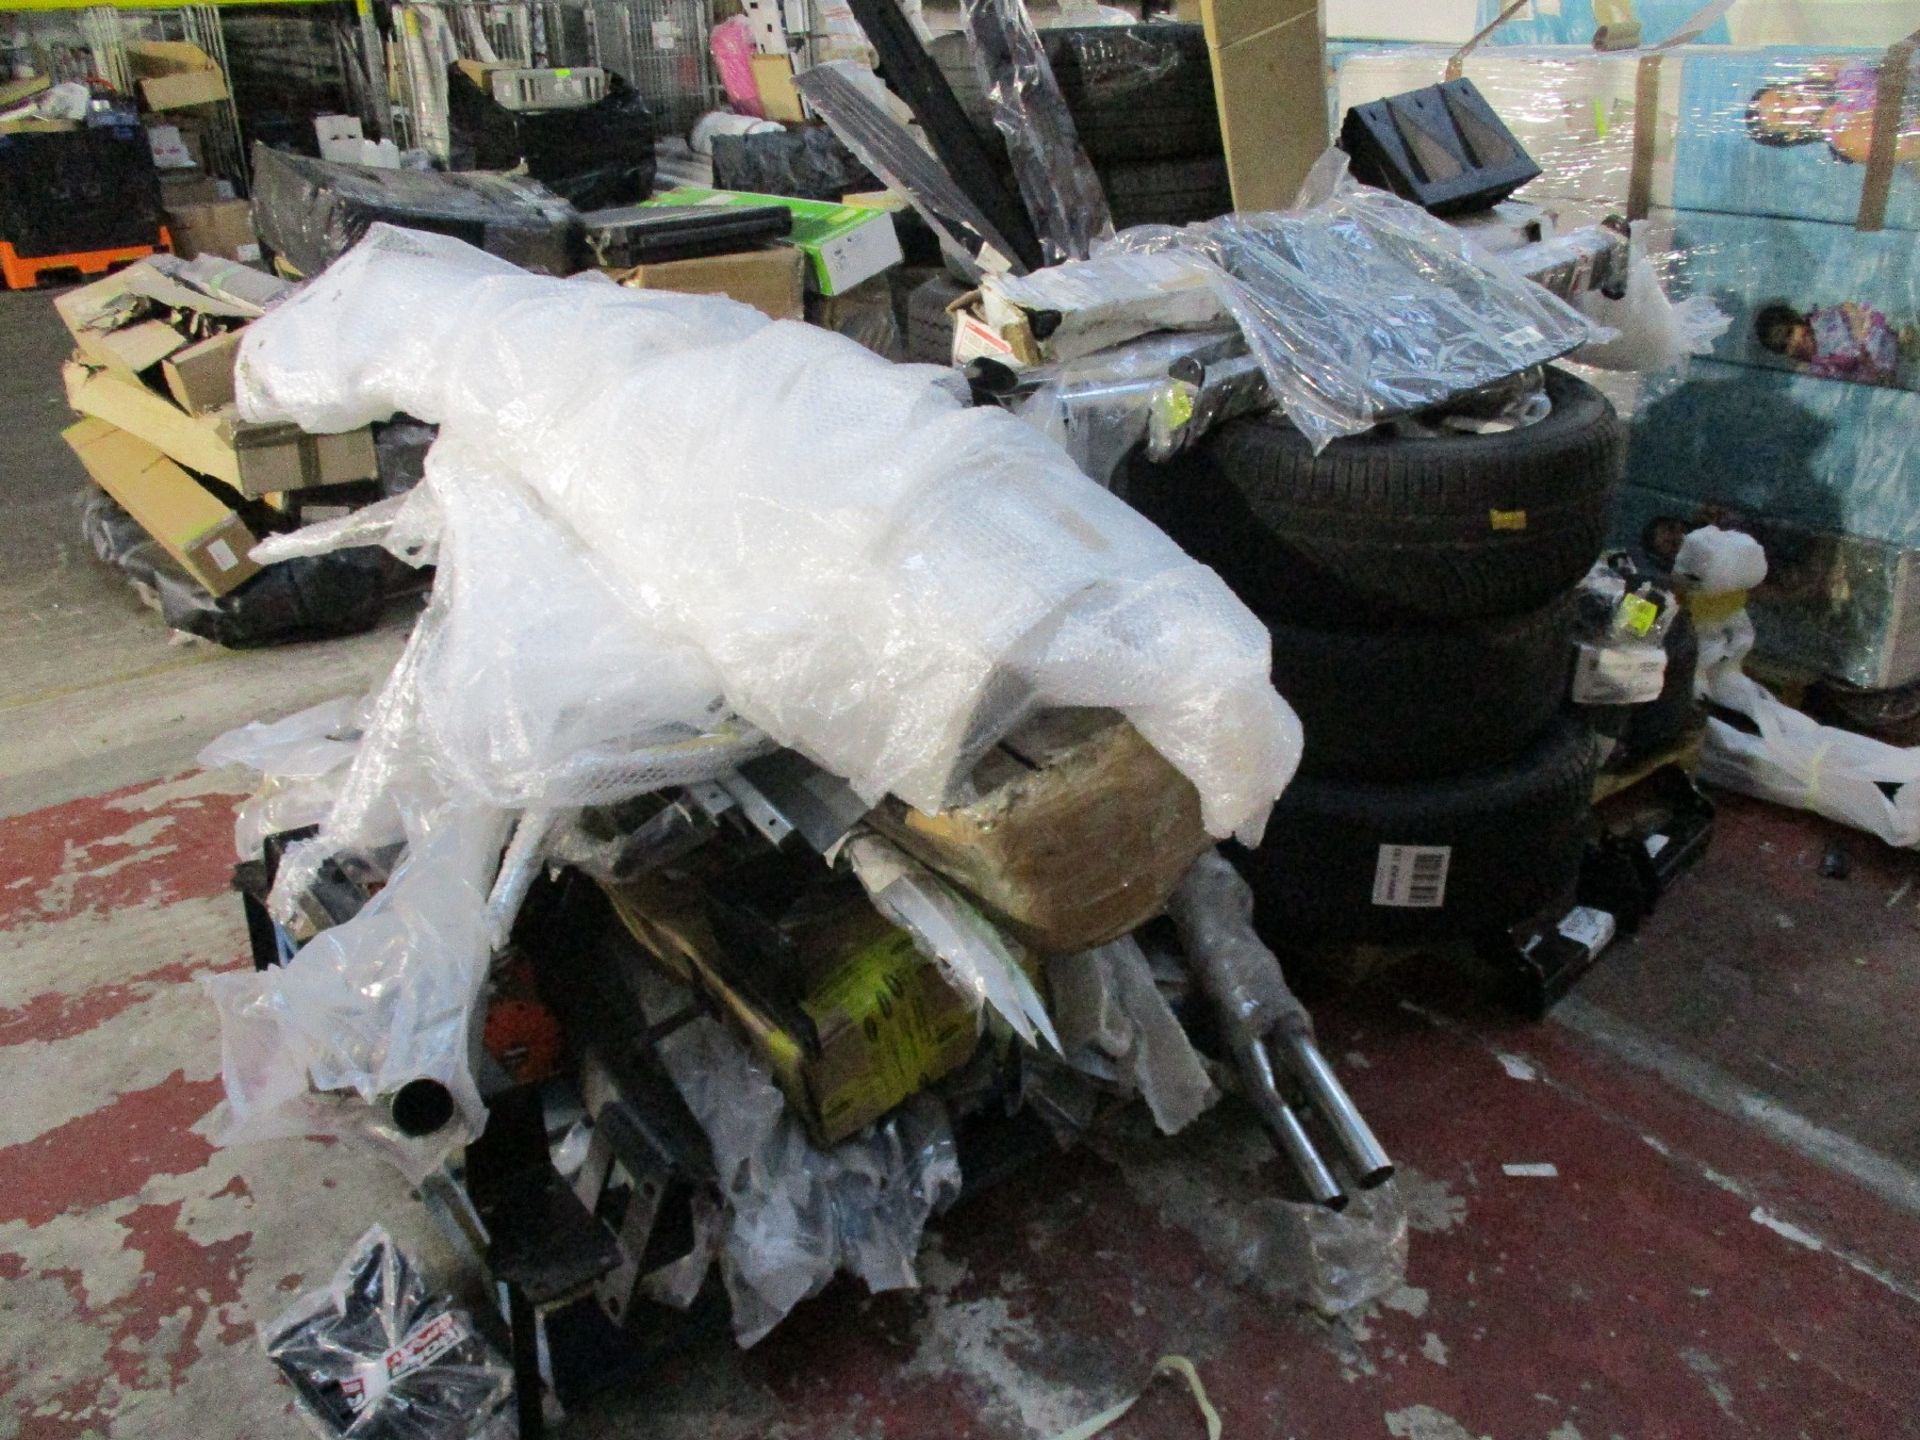 Two pallets of car parts and related items.